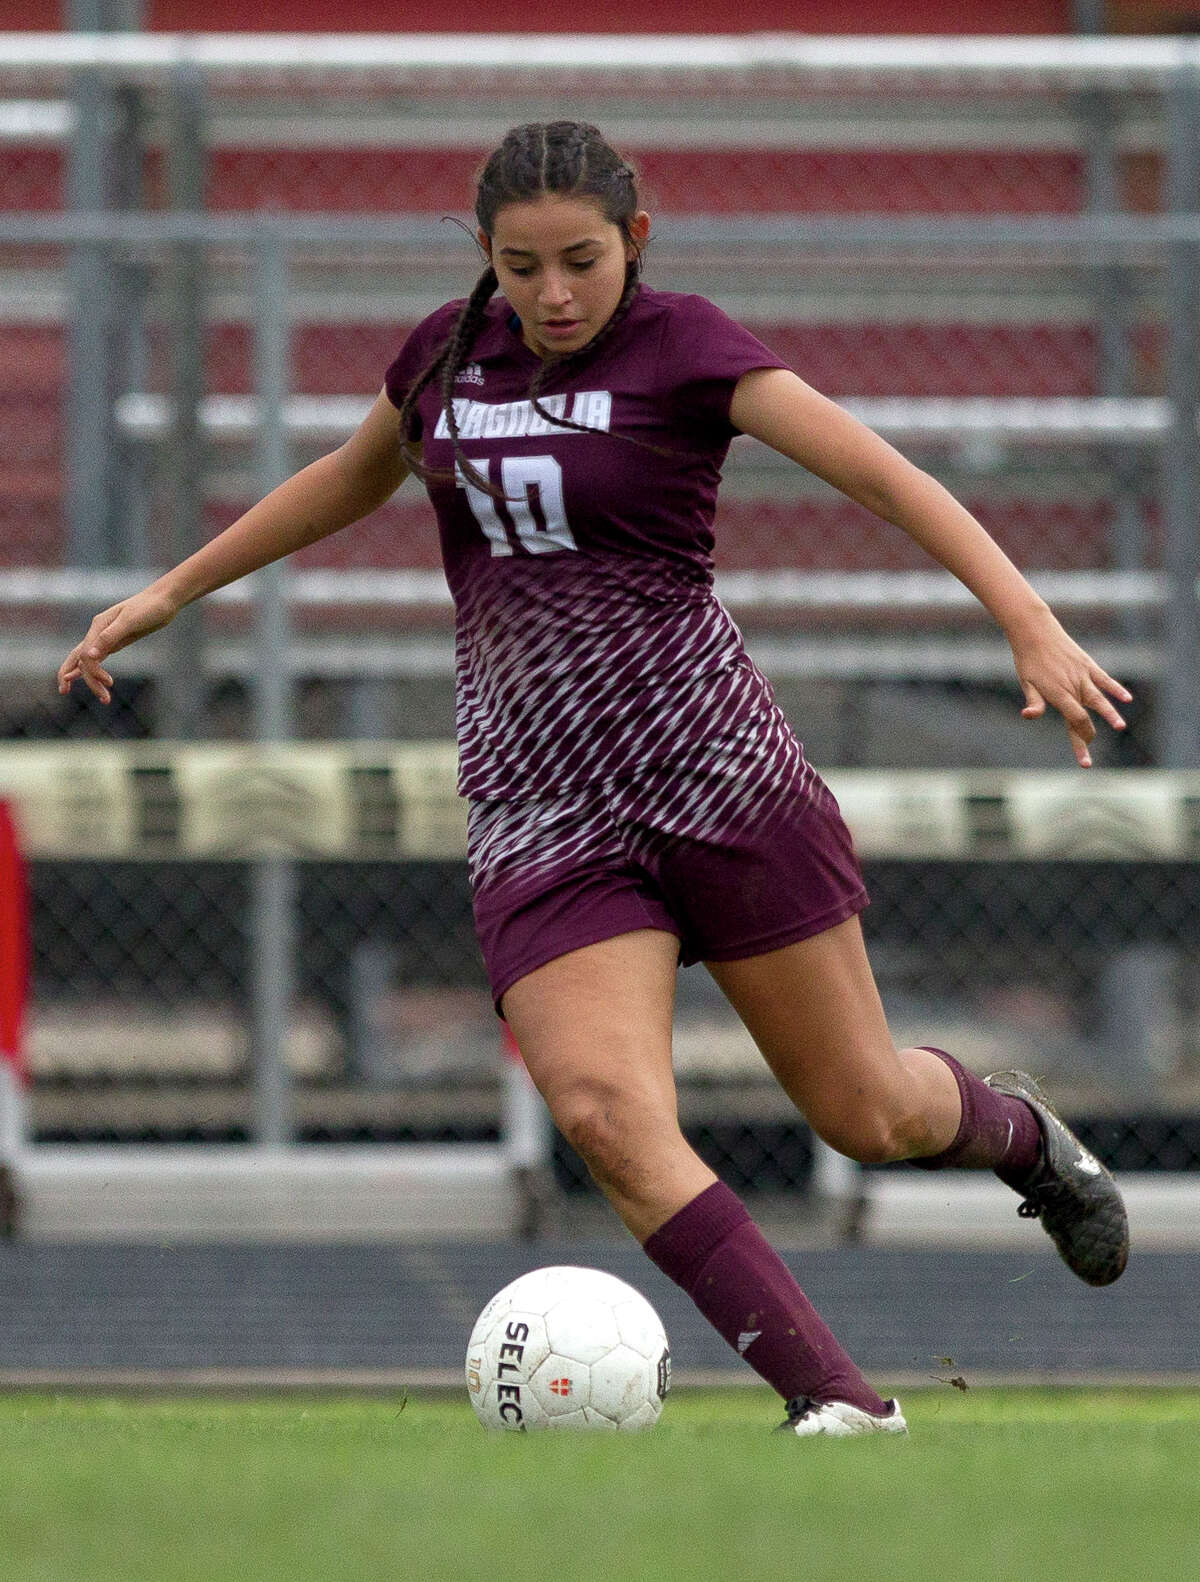 Magnolia forward Vanessa Aragon (10) makes a pass during the first period of a high school girls soccer match in the Texans Drive Tournament at Porter High School Friday, Jan. 20, 2017, in Porter.